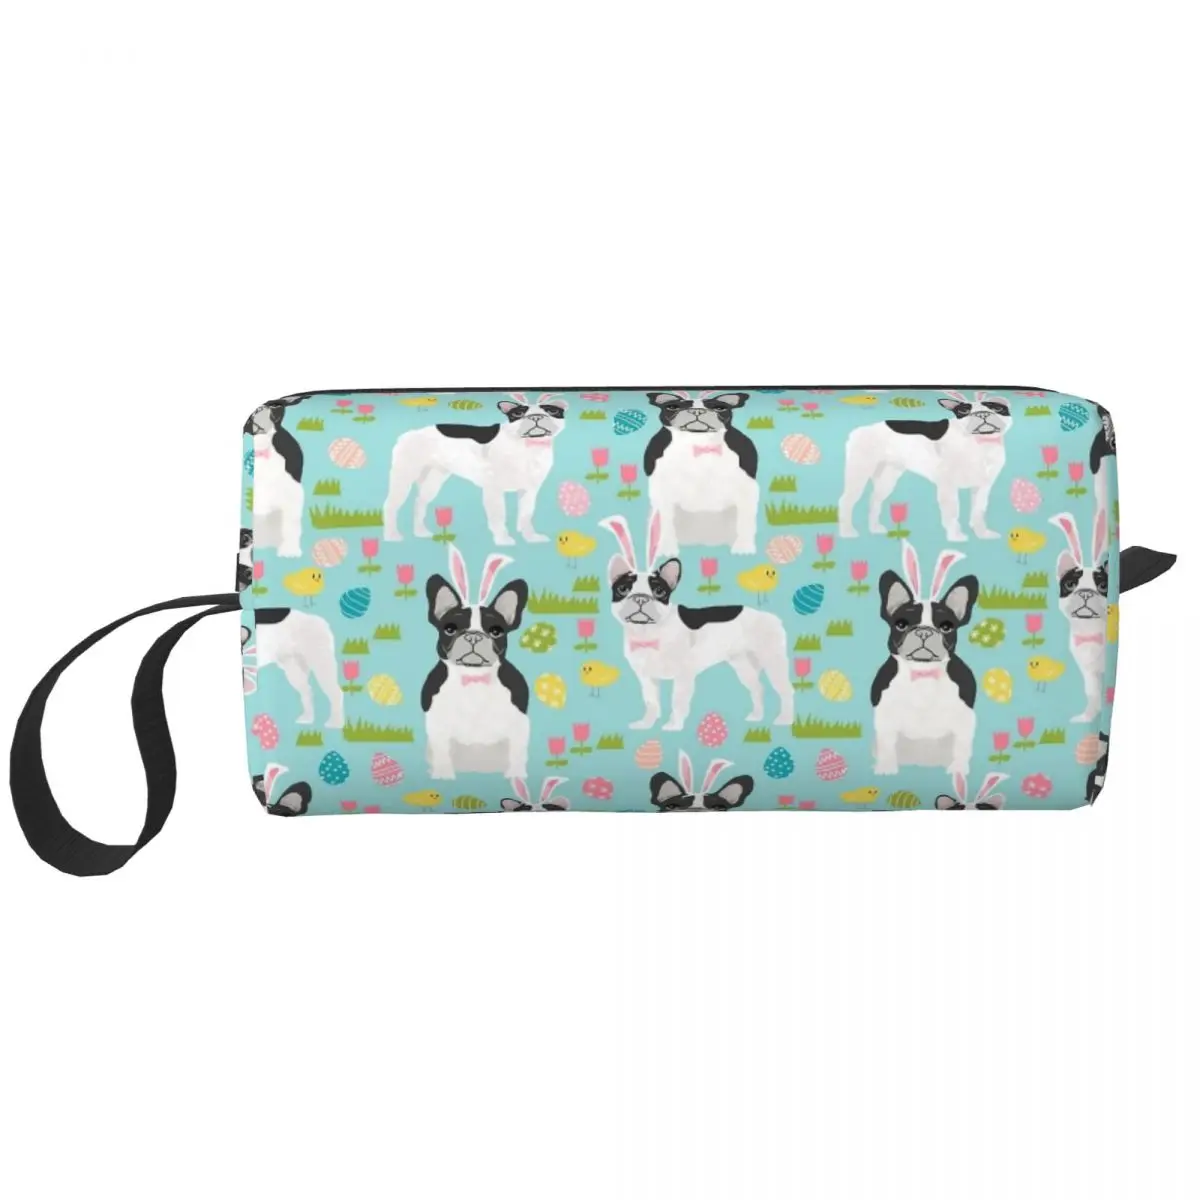 

French Bulldog Easter Spring Dog Cosmetic Bag Women Makeup Bags Travel Waterproof Toiletry Bag Organizer Pouch